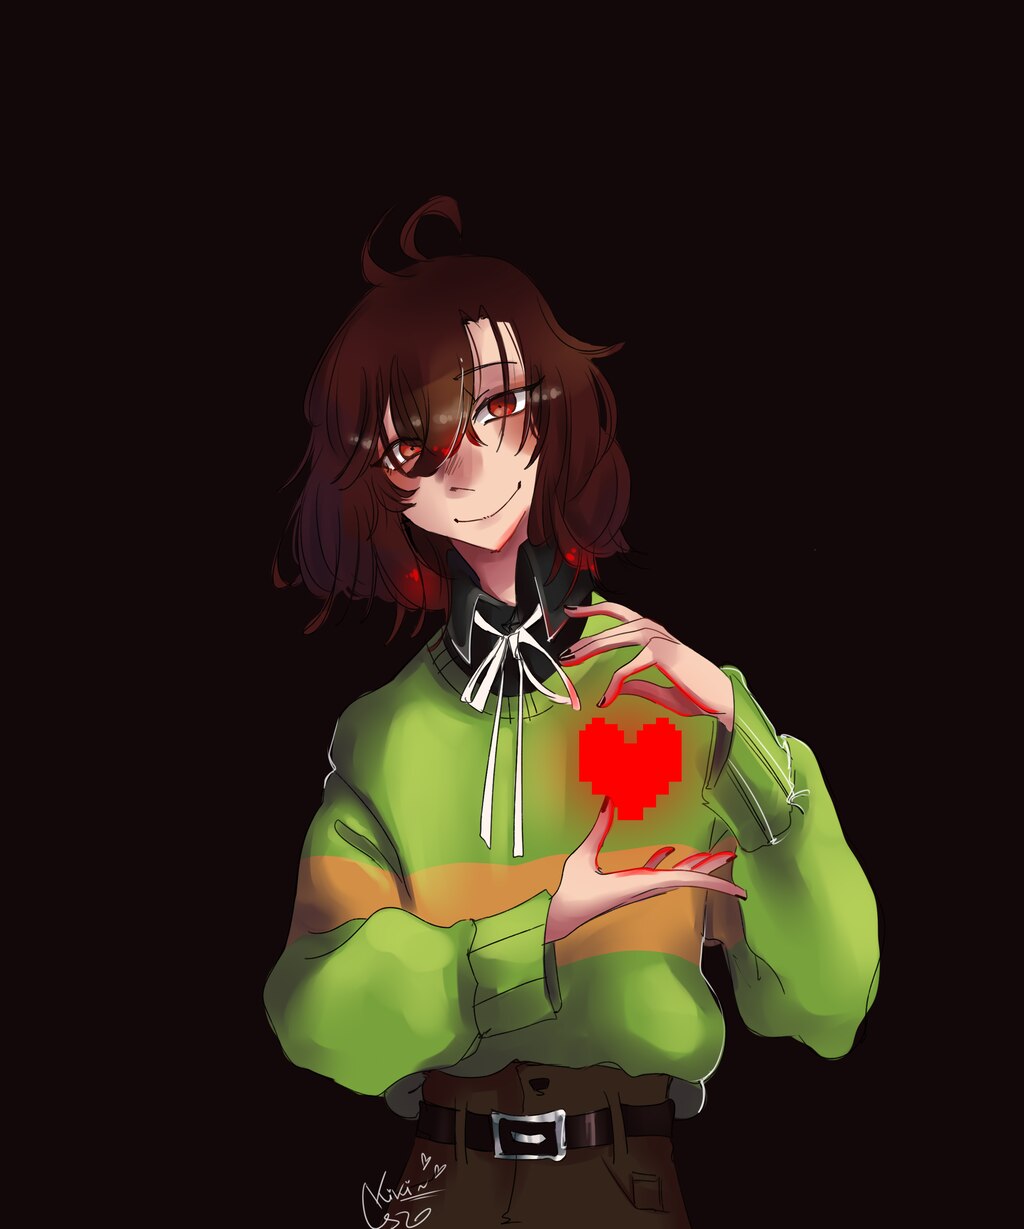 Chara - Undertale  Animated Steam Artwork Profile by DryreL on